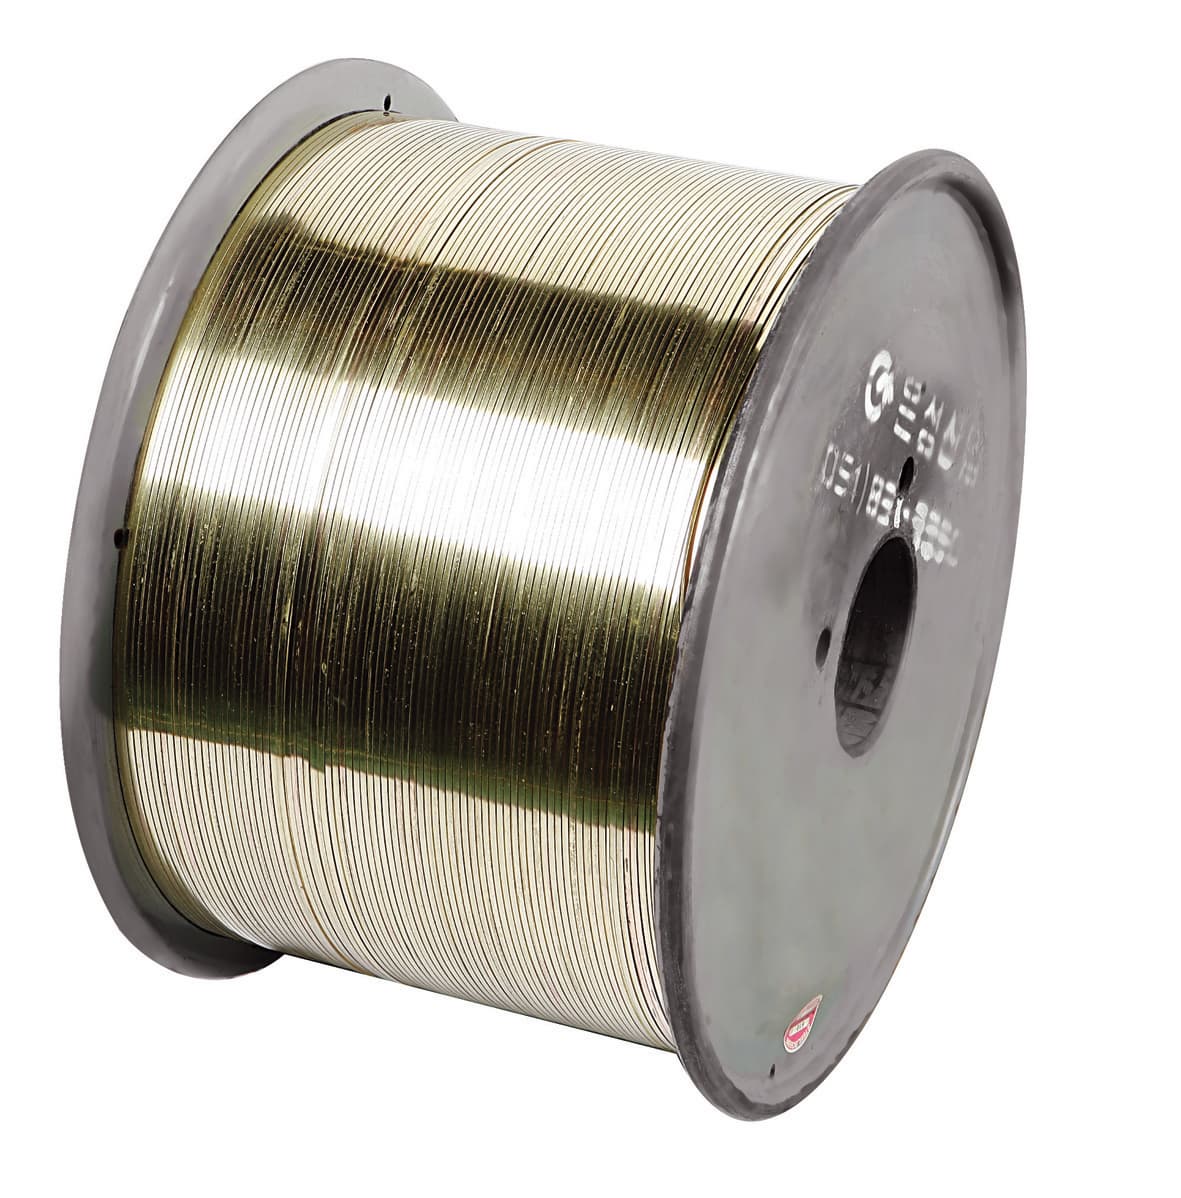 Harsh Environment Used Phosphor Bronze Tin-Copper Wire with Plastic Reel  Packaging - China Phosphor Bronze Wire, Copper Alloy Wirebronze